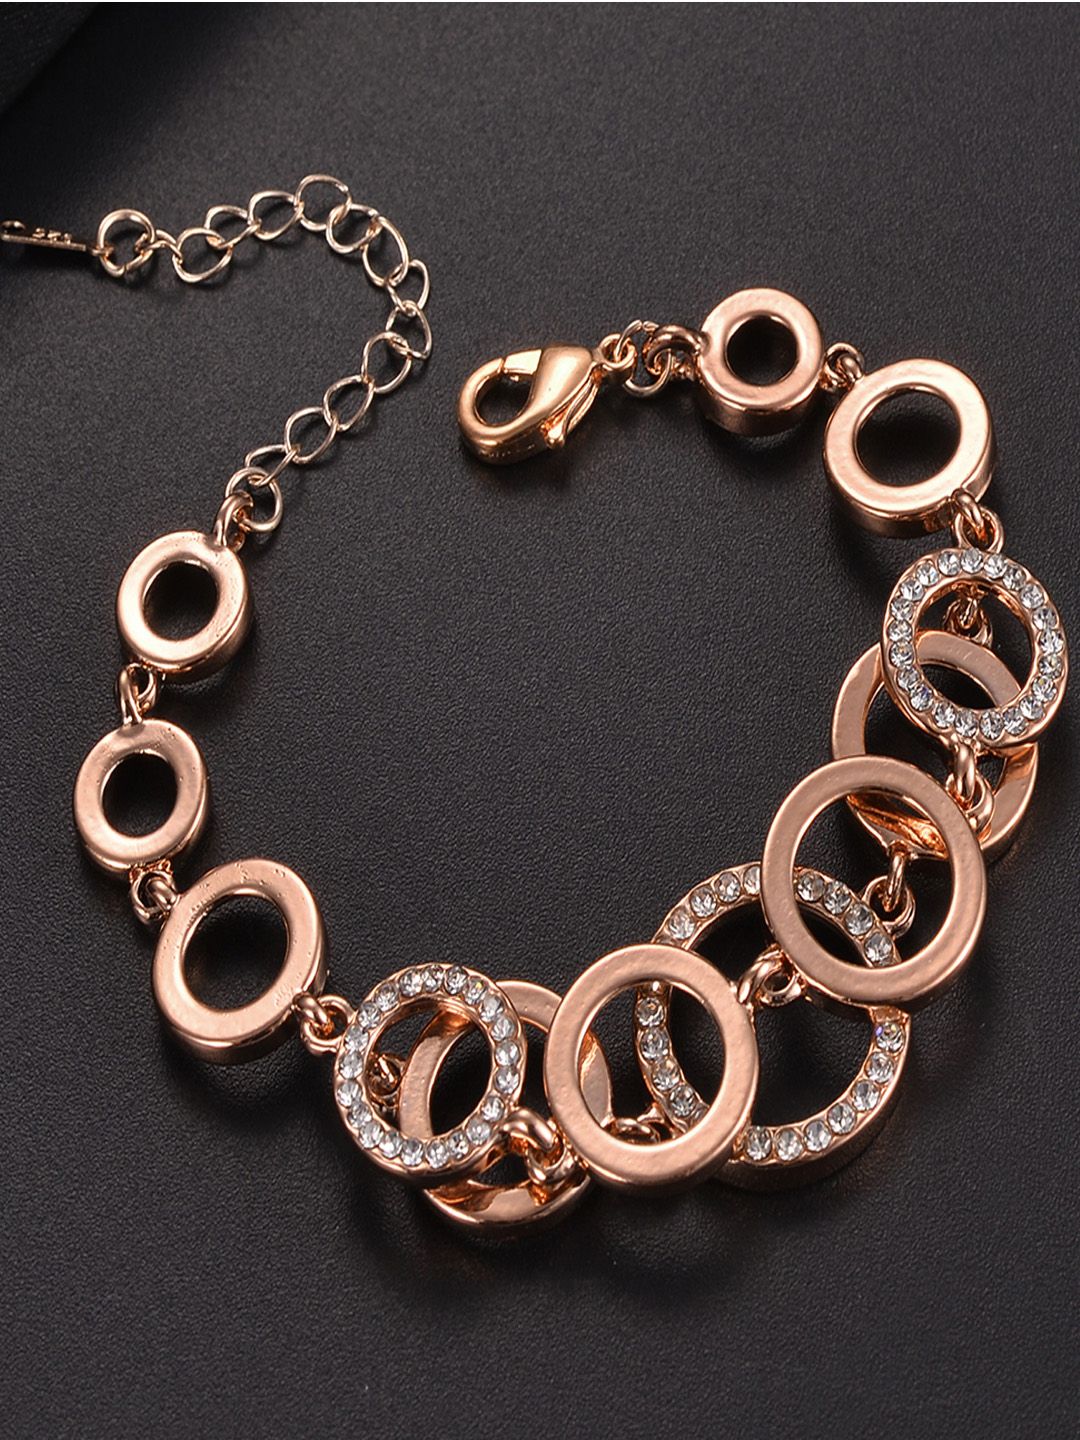 Shining Diva Fashion Women 18k Rose Gold-Plated  White Crystals Charm Bracelet Price in India